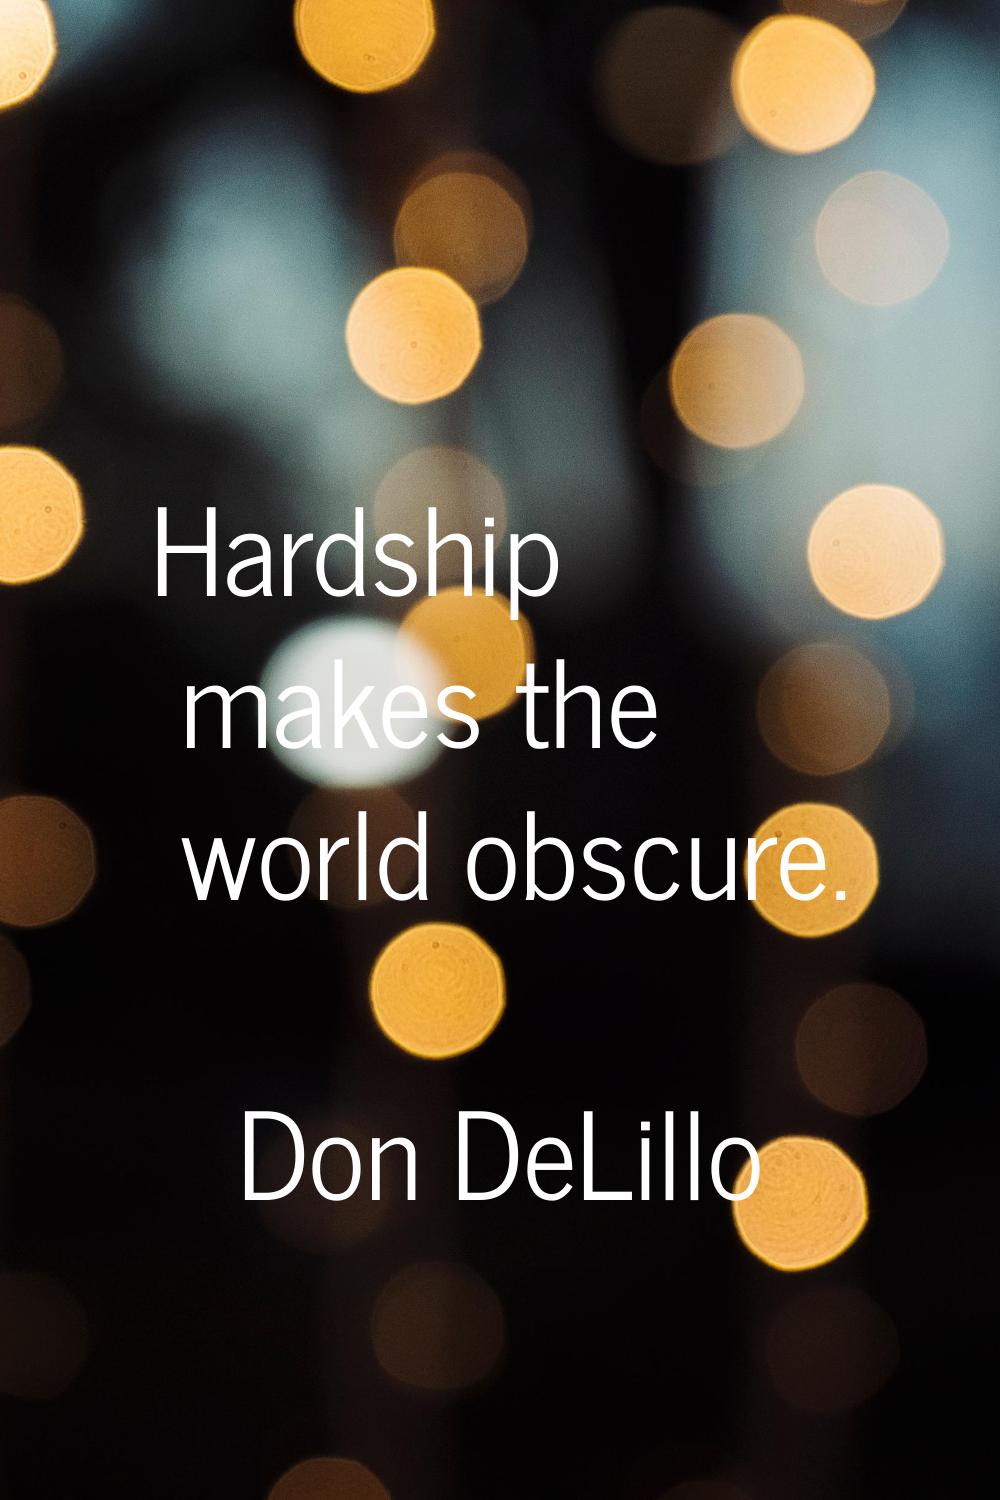 Hardship makes the world obscure.